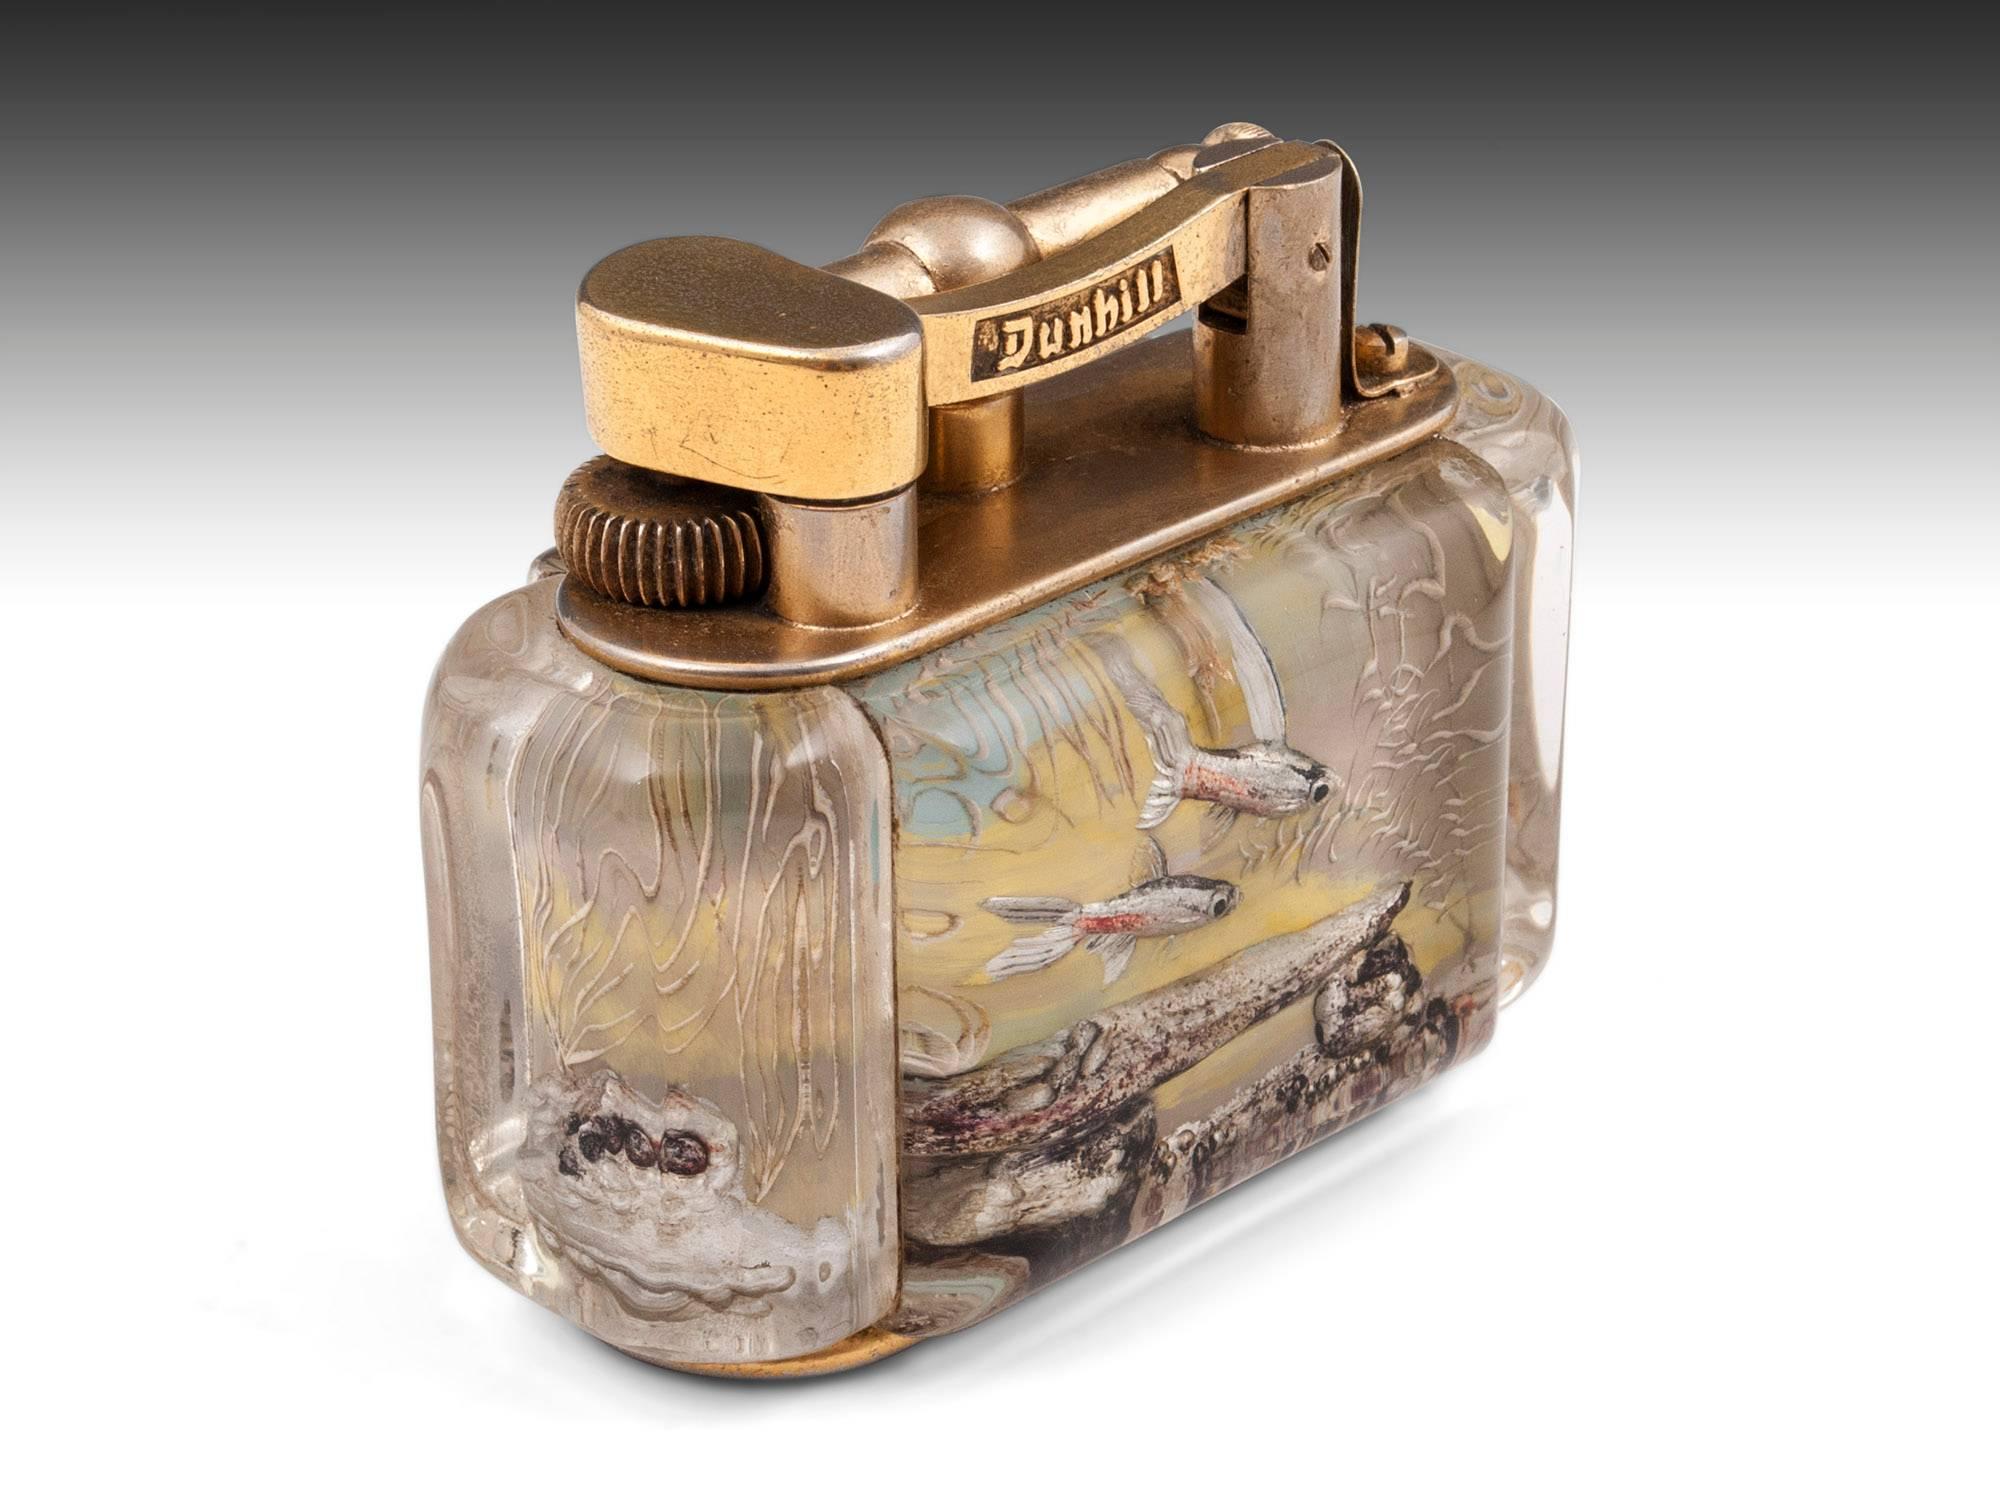 Aquarium table lighter by Alfred Dunhill. 

This "half-giant" size lighter features reverse carved and painted Lucite panels with decoration of fish swimming underwater and features a gilded mechanism with the Dunhill retailers mark.